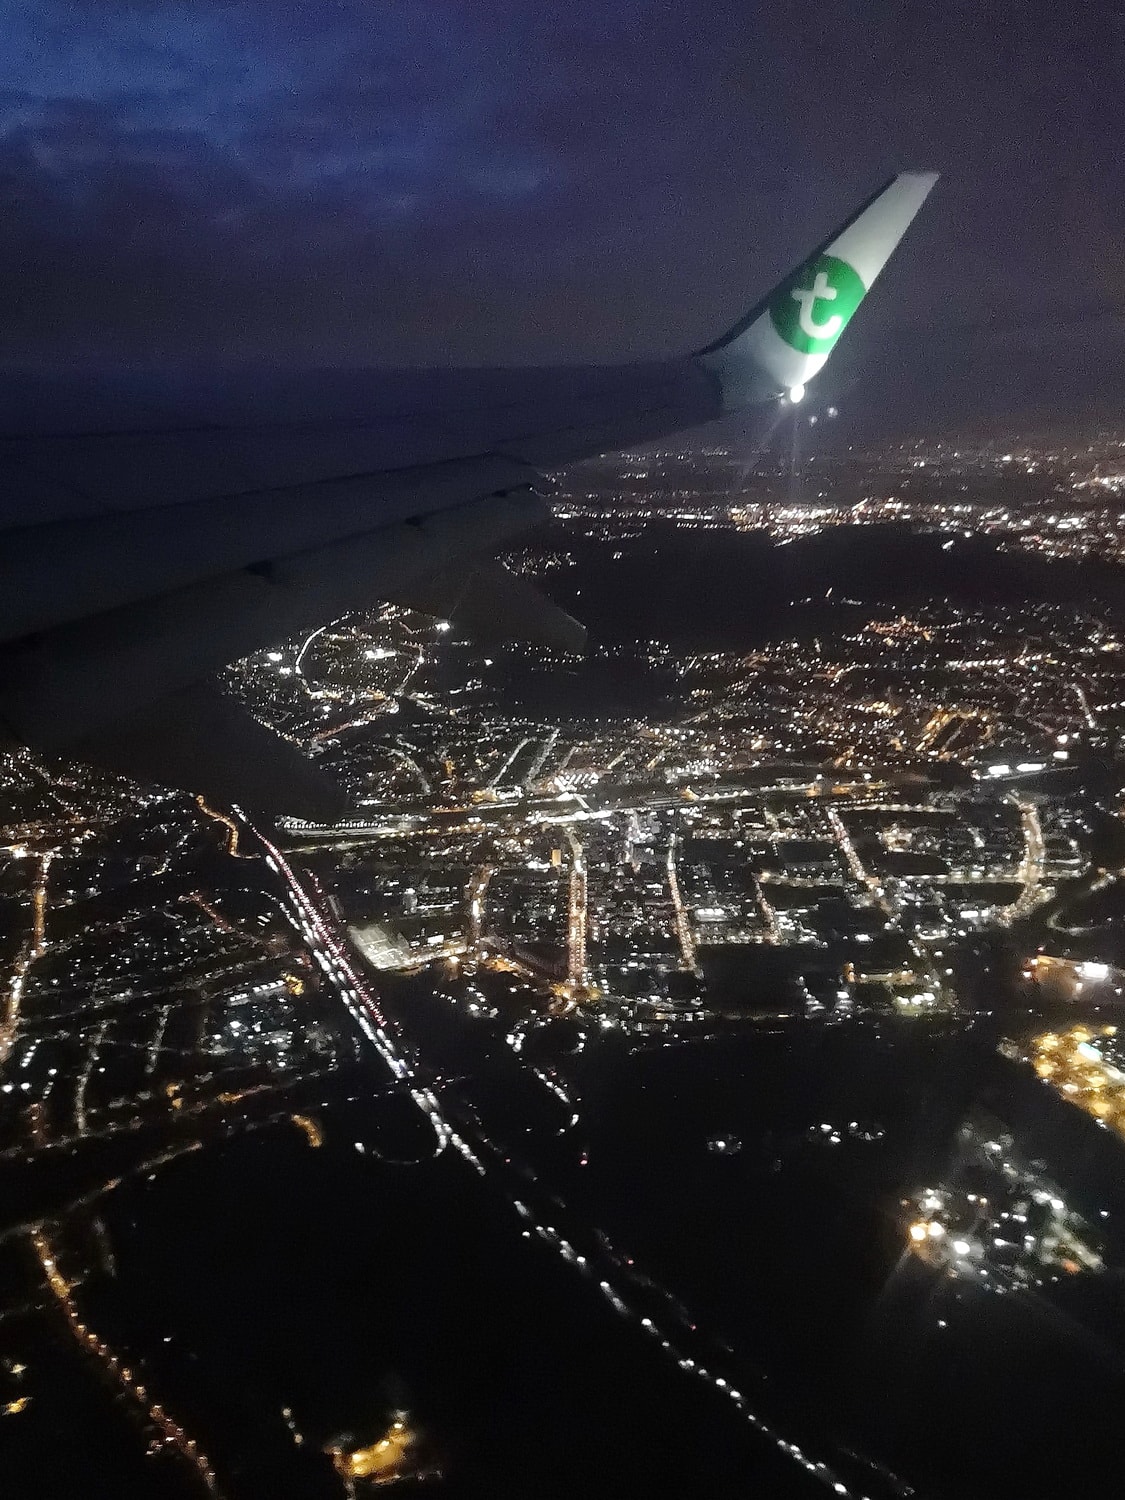 Paris at night, leaving Orly airport bound for Prague